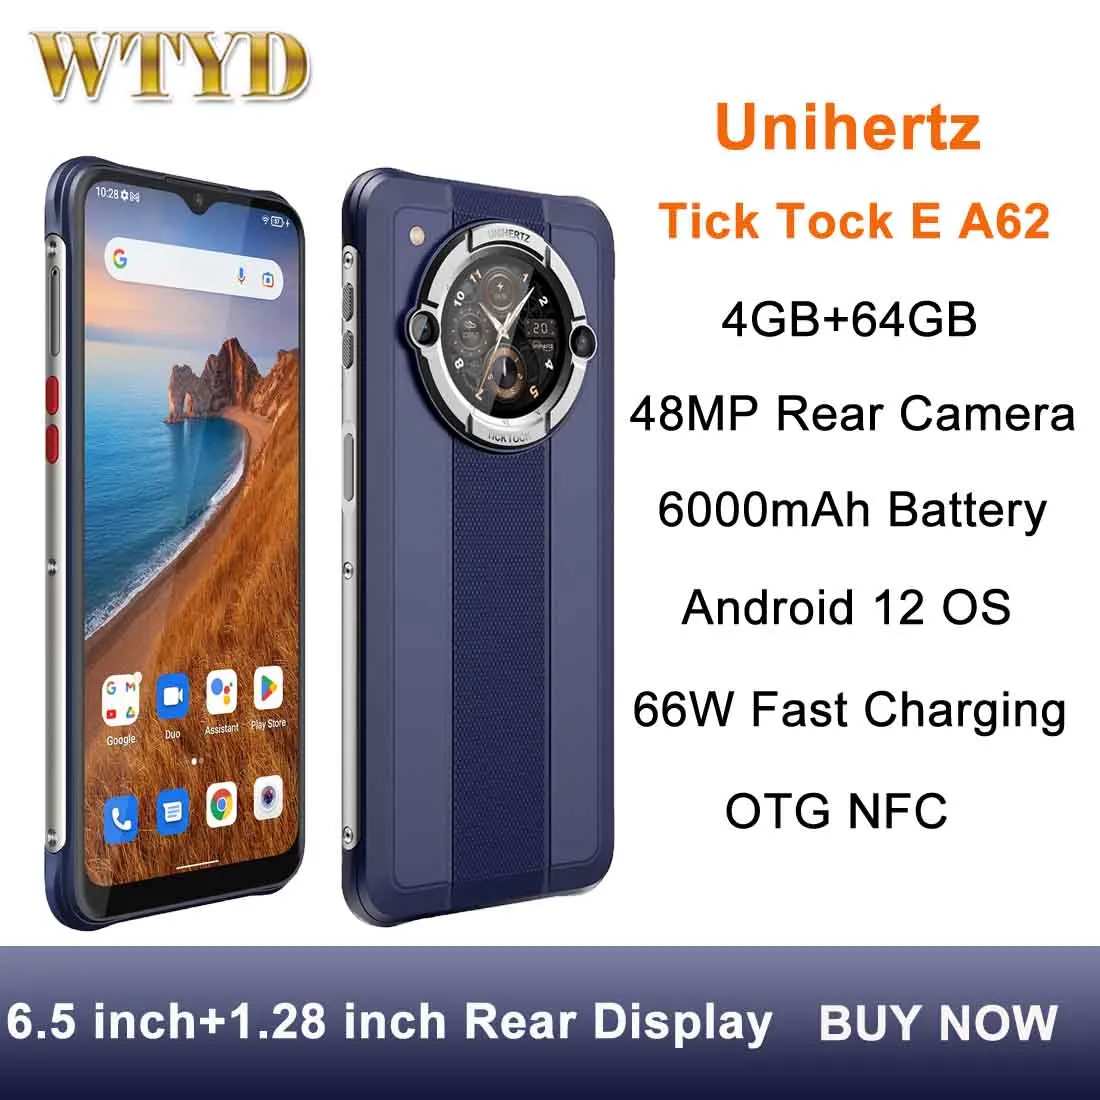 Unihertz TickTock first look: 5G rugged phone with unique rear